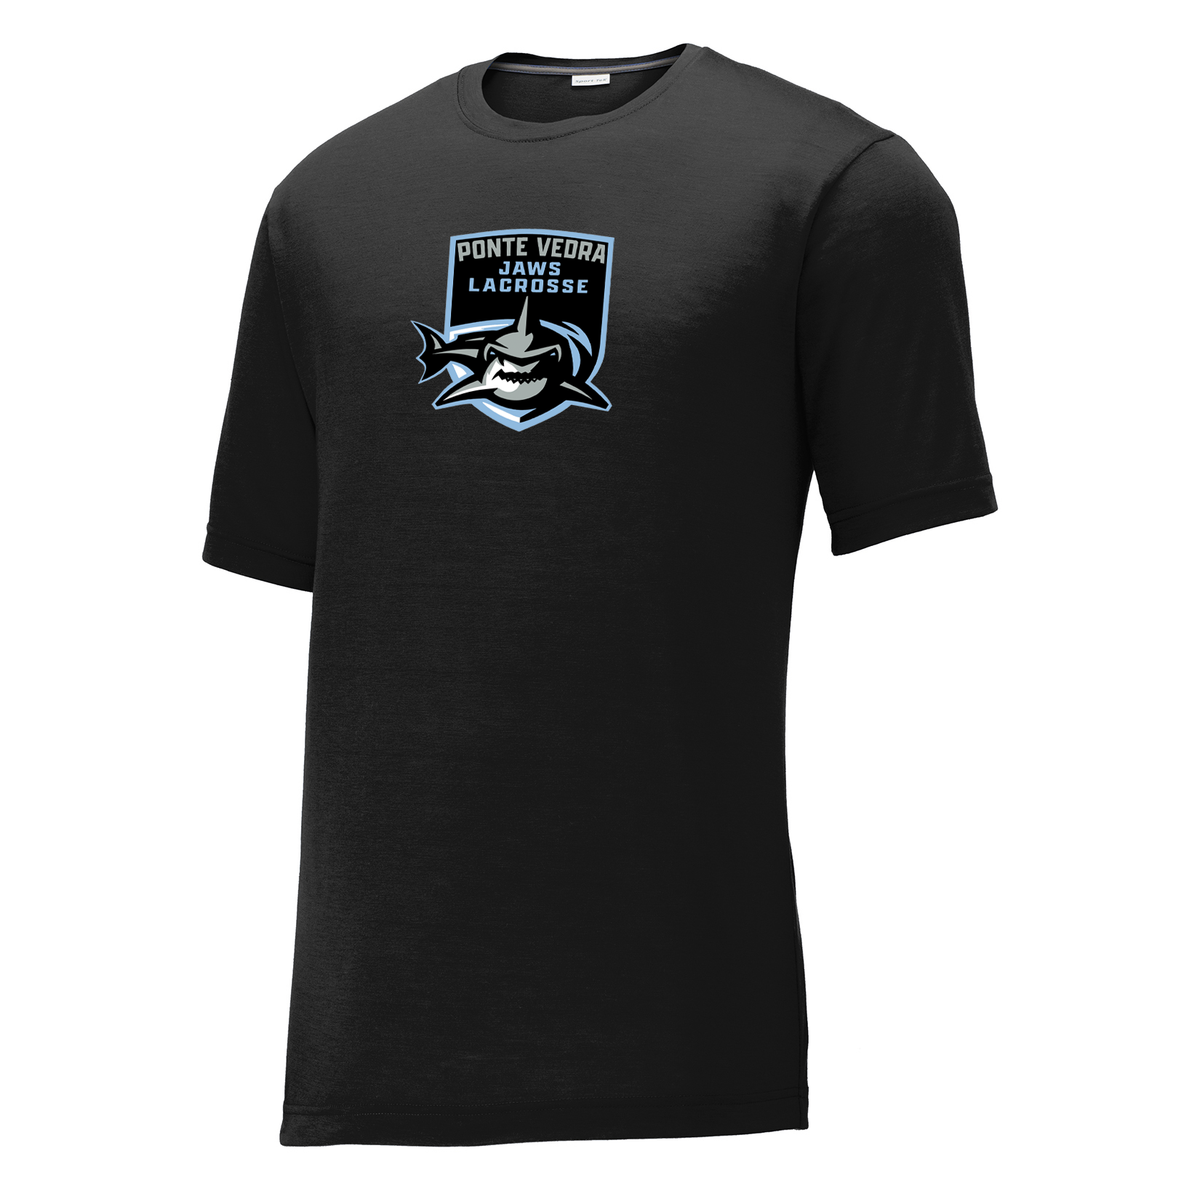 Ponte Vedra JAWS Lacrosse CottonTouch Performance T-Shirt